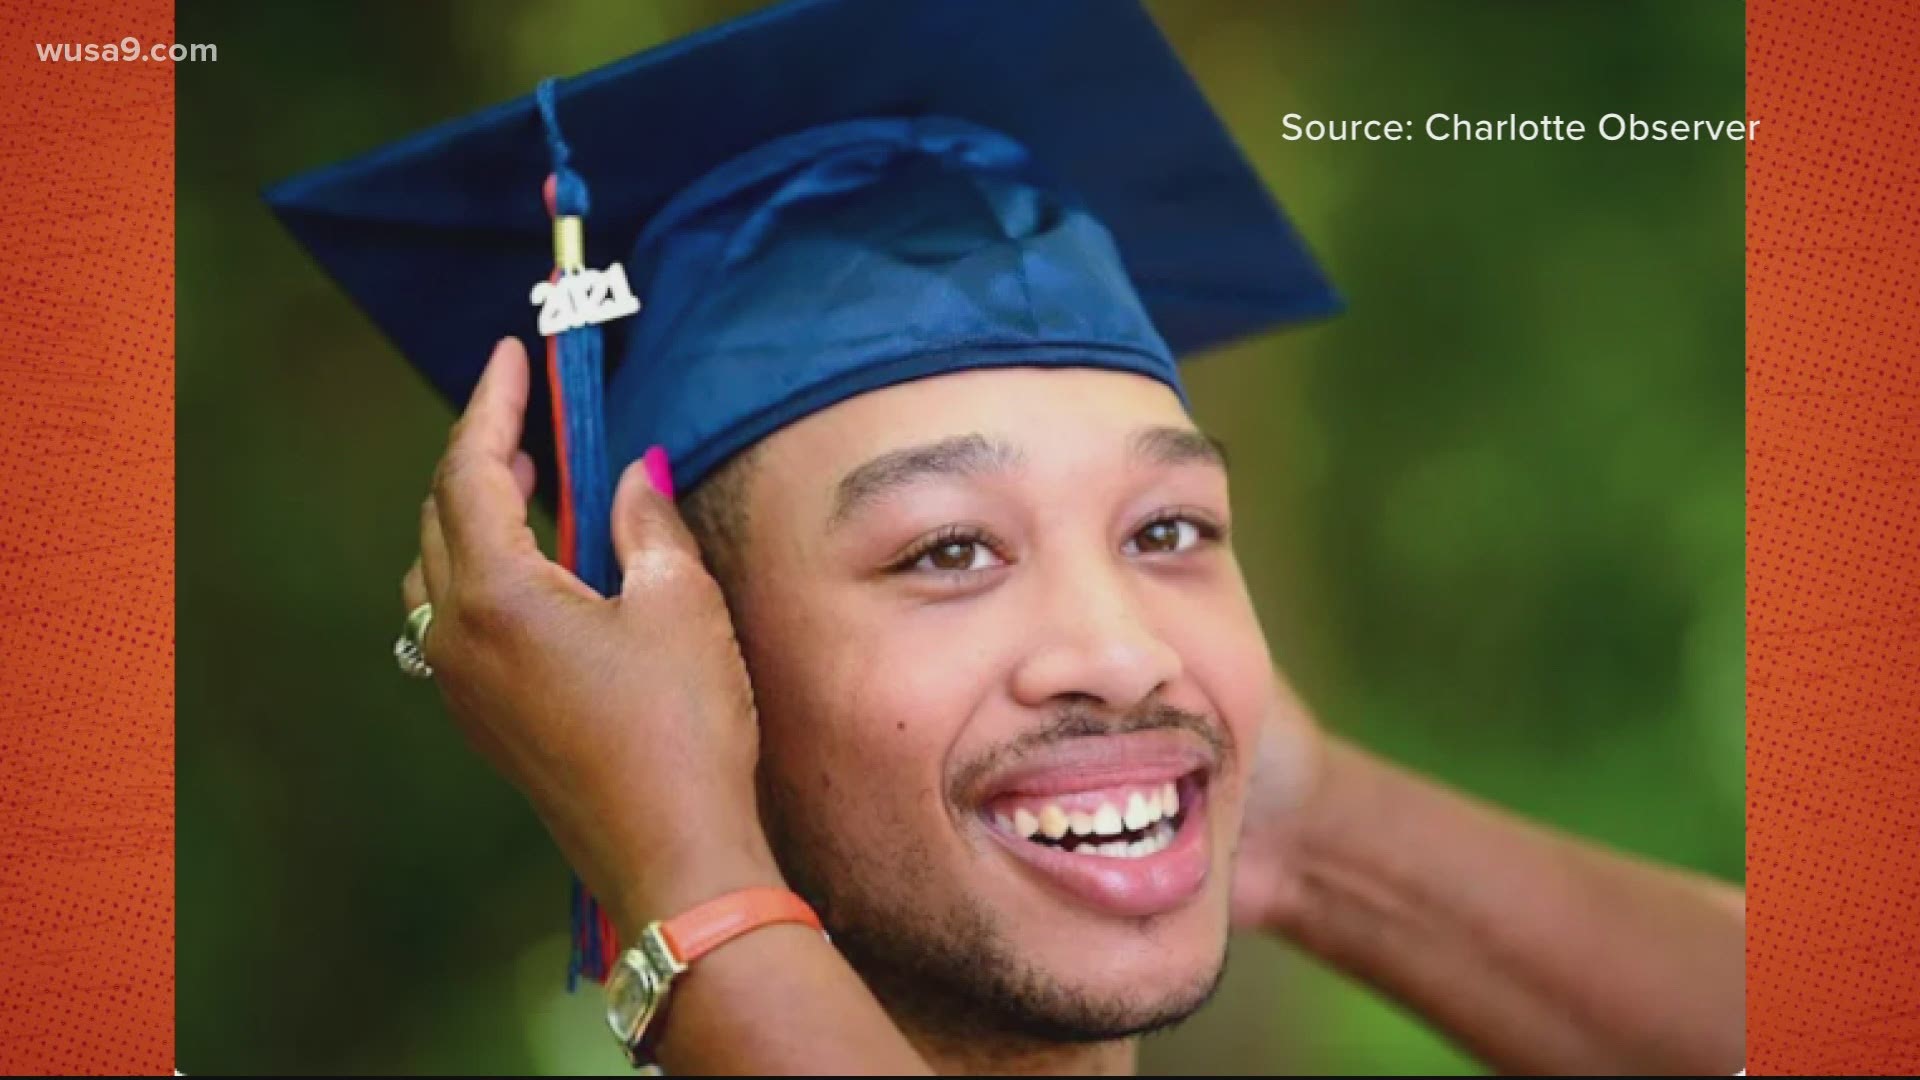 More than 20 years after a murder plot that killed his moth, Chancellor Lee Adams is graduating from high school.